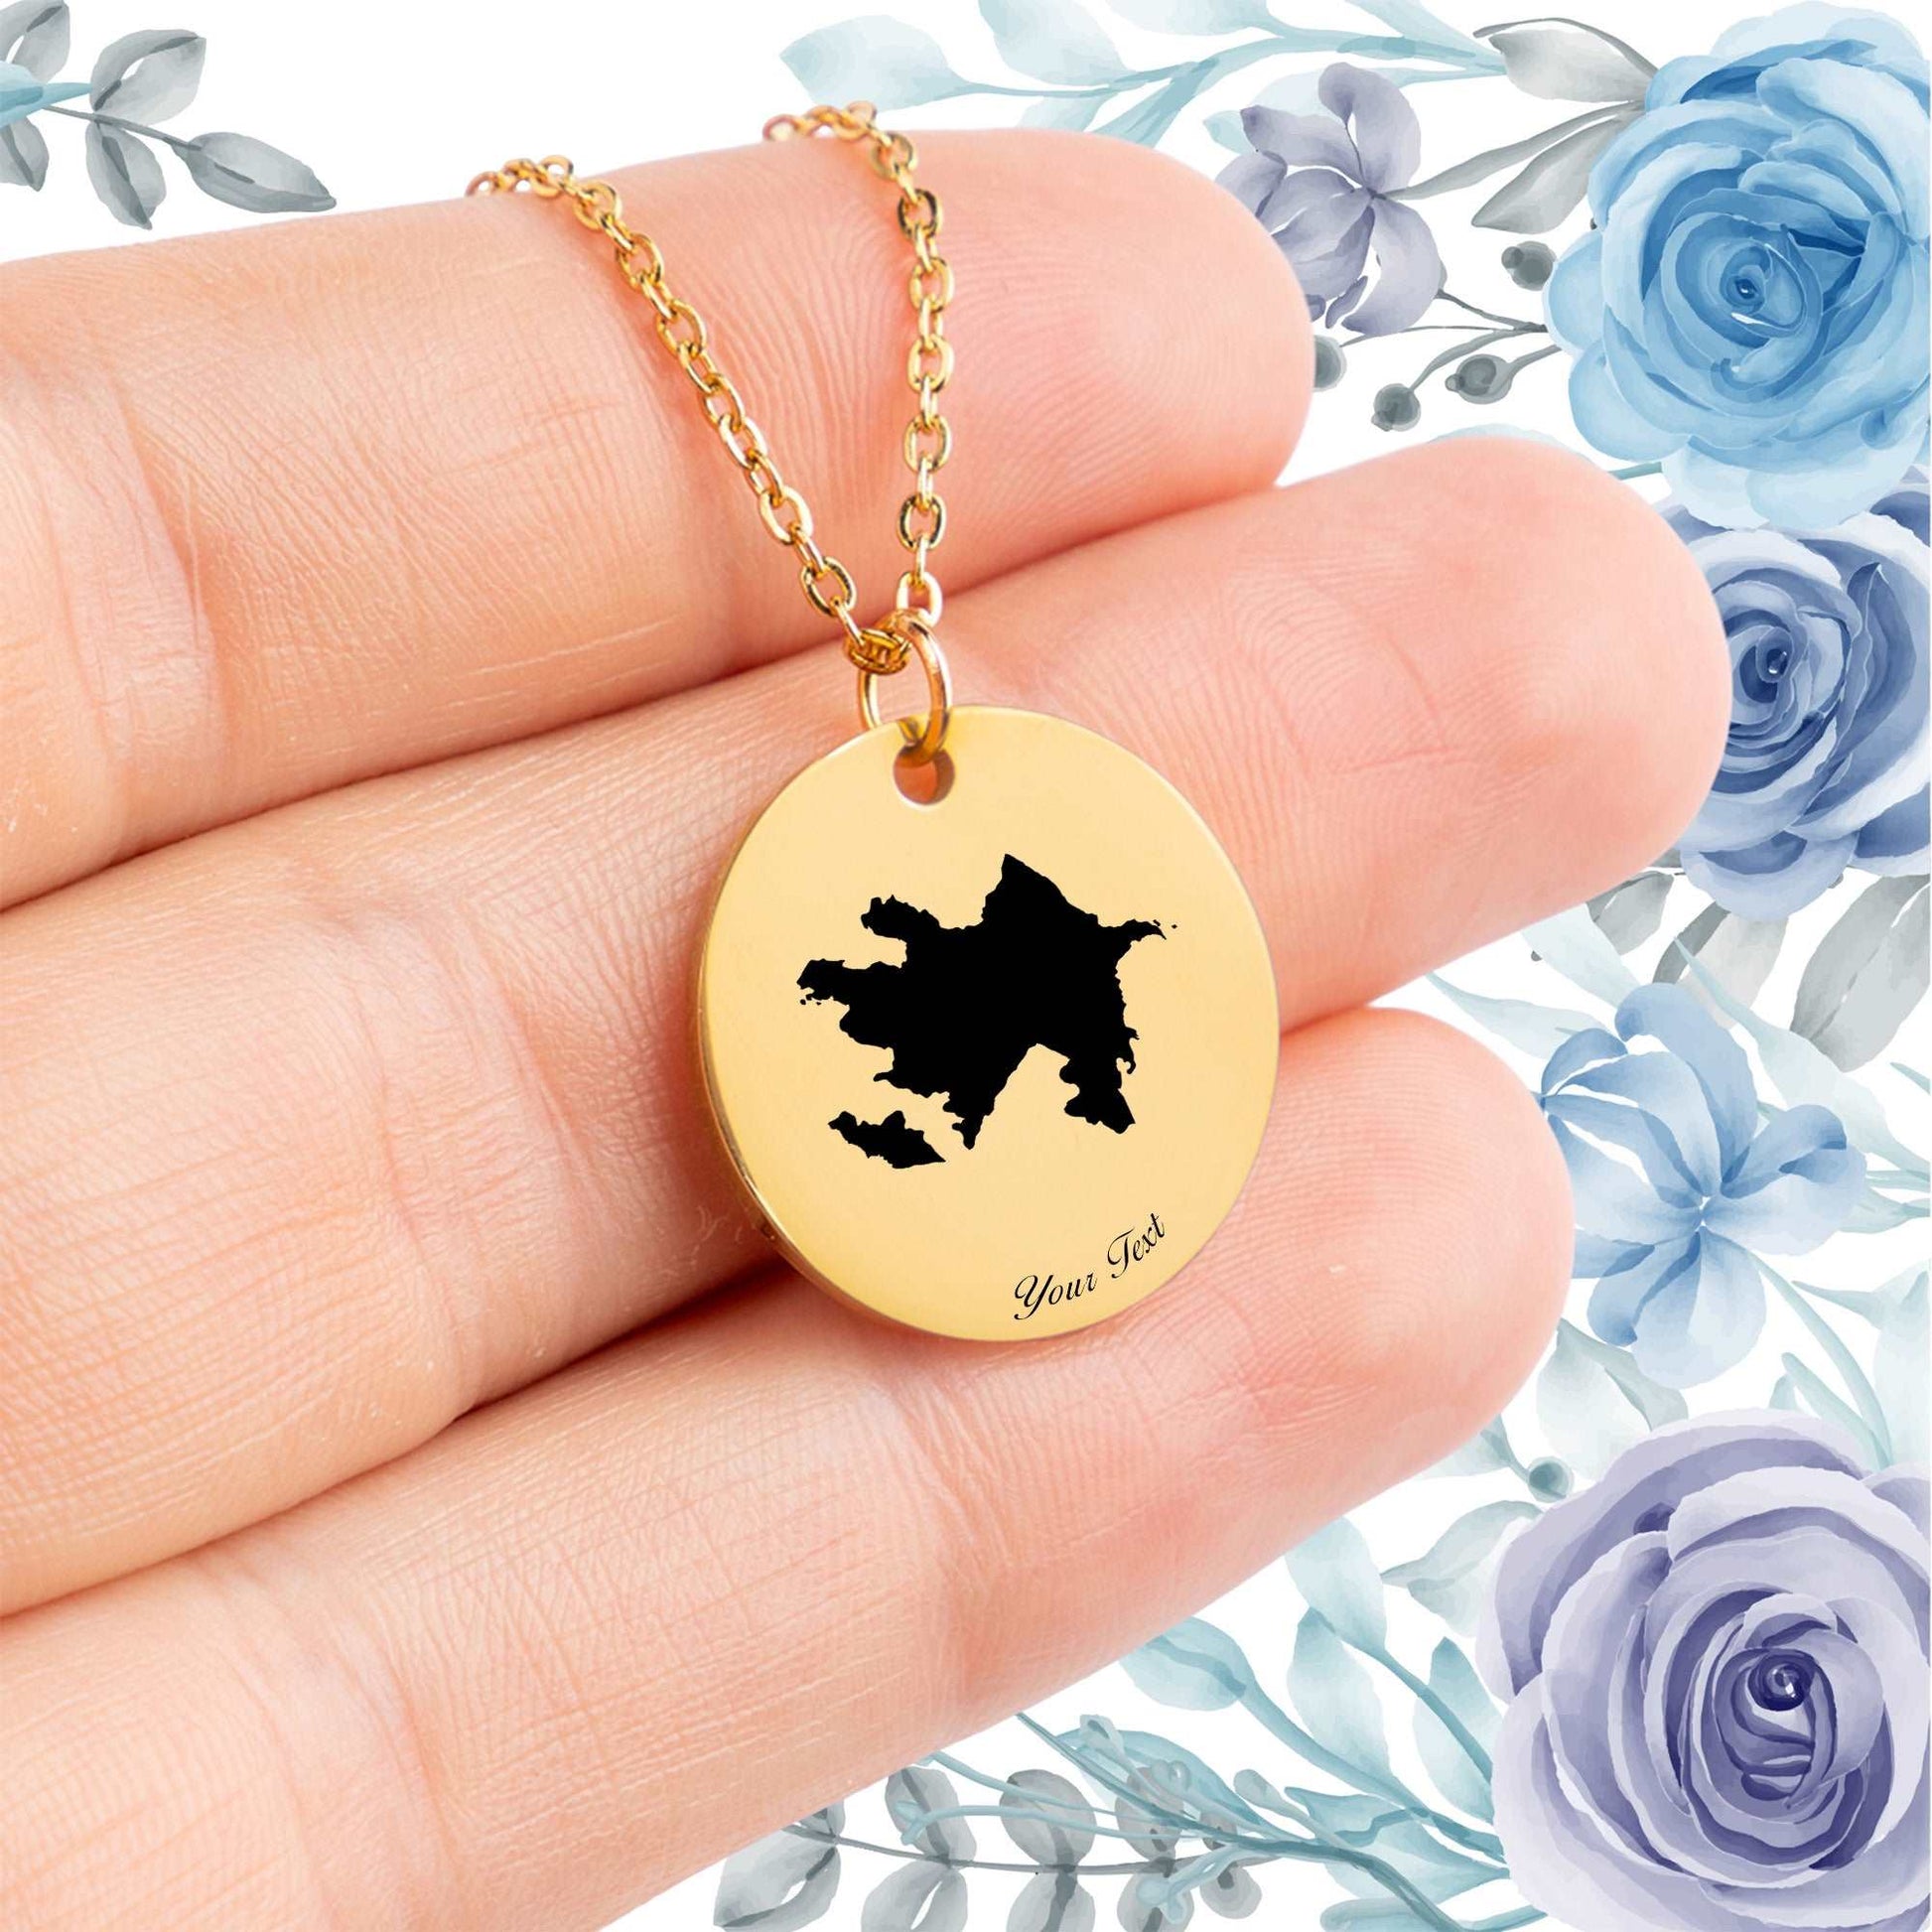 Azerbaijan Country Map Necklace - Personalizable Jewelry